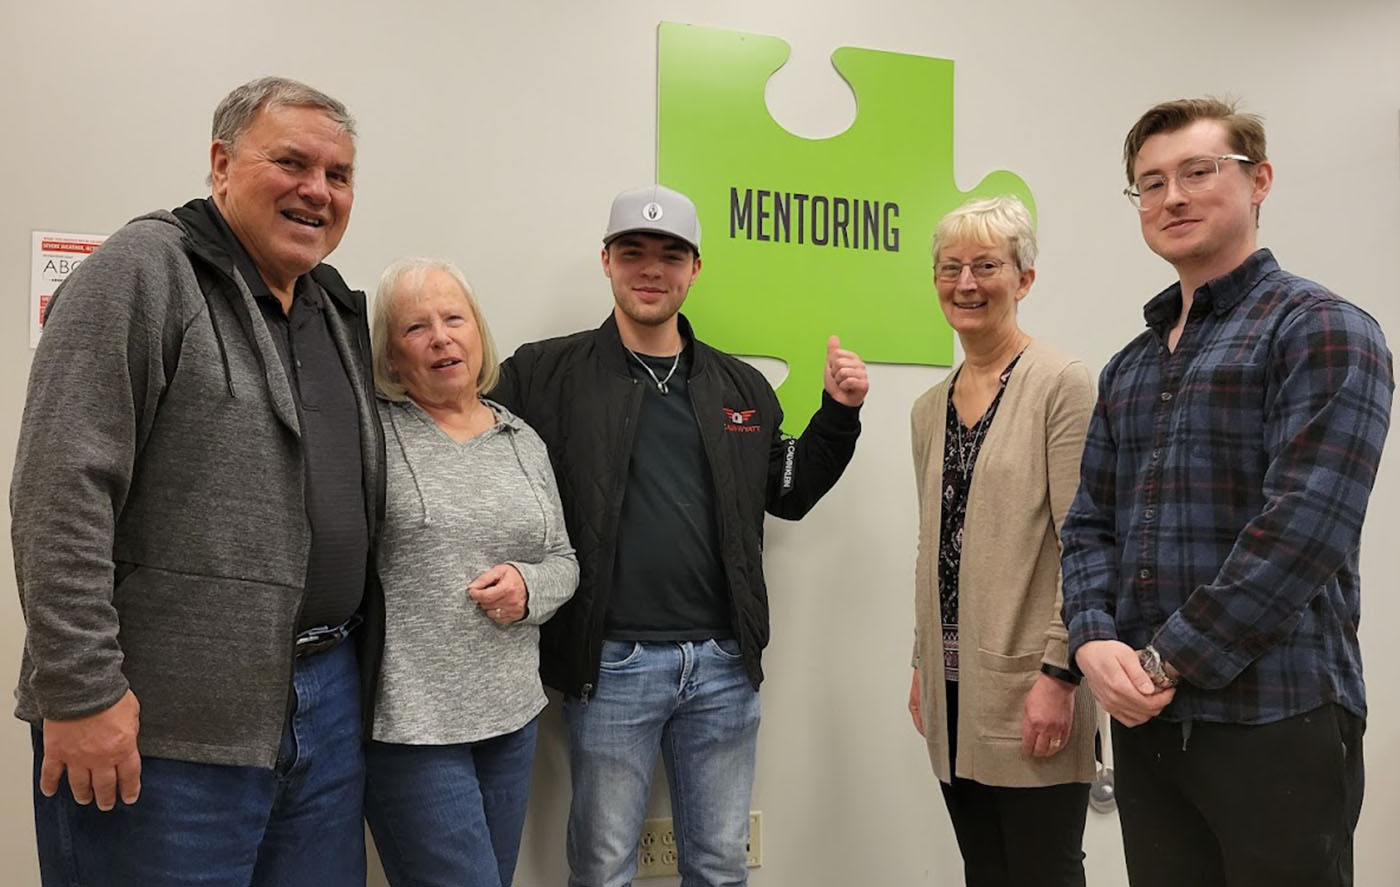 Pictured are Joe Swift (left) and his partner, Kathy Kendzior, who has assisted with the mentoring process as well as classroom sessions related to investing. Also shown are Calvin Wyatt (center), Holly Hanson, and Christian Heislop (far right).